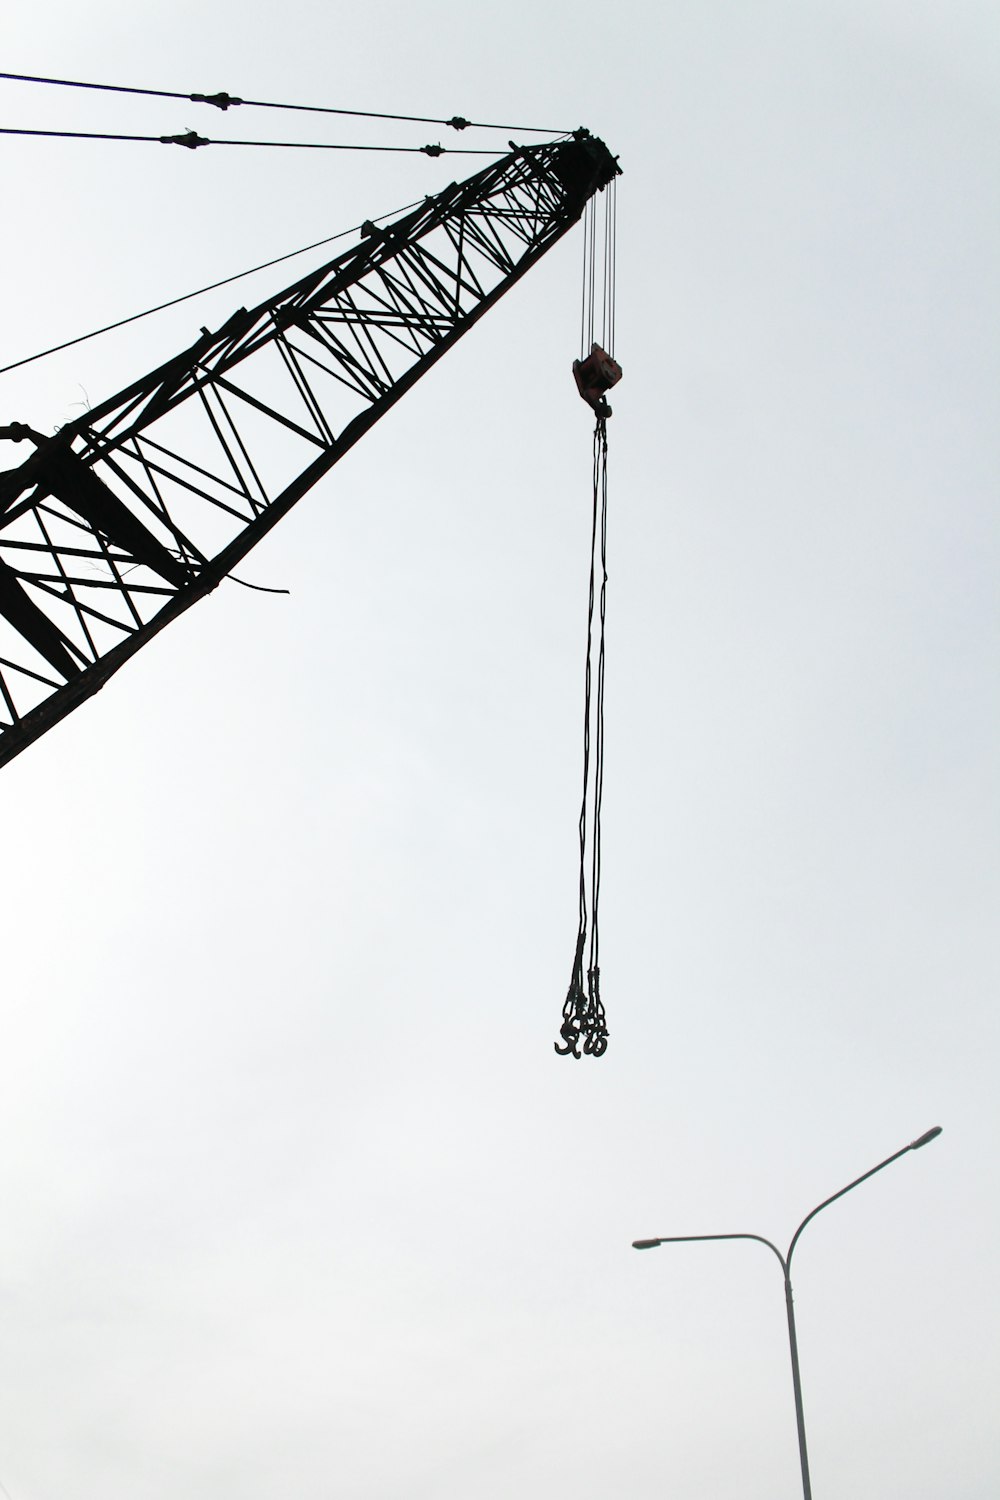 a crane that is hanging from a wire